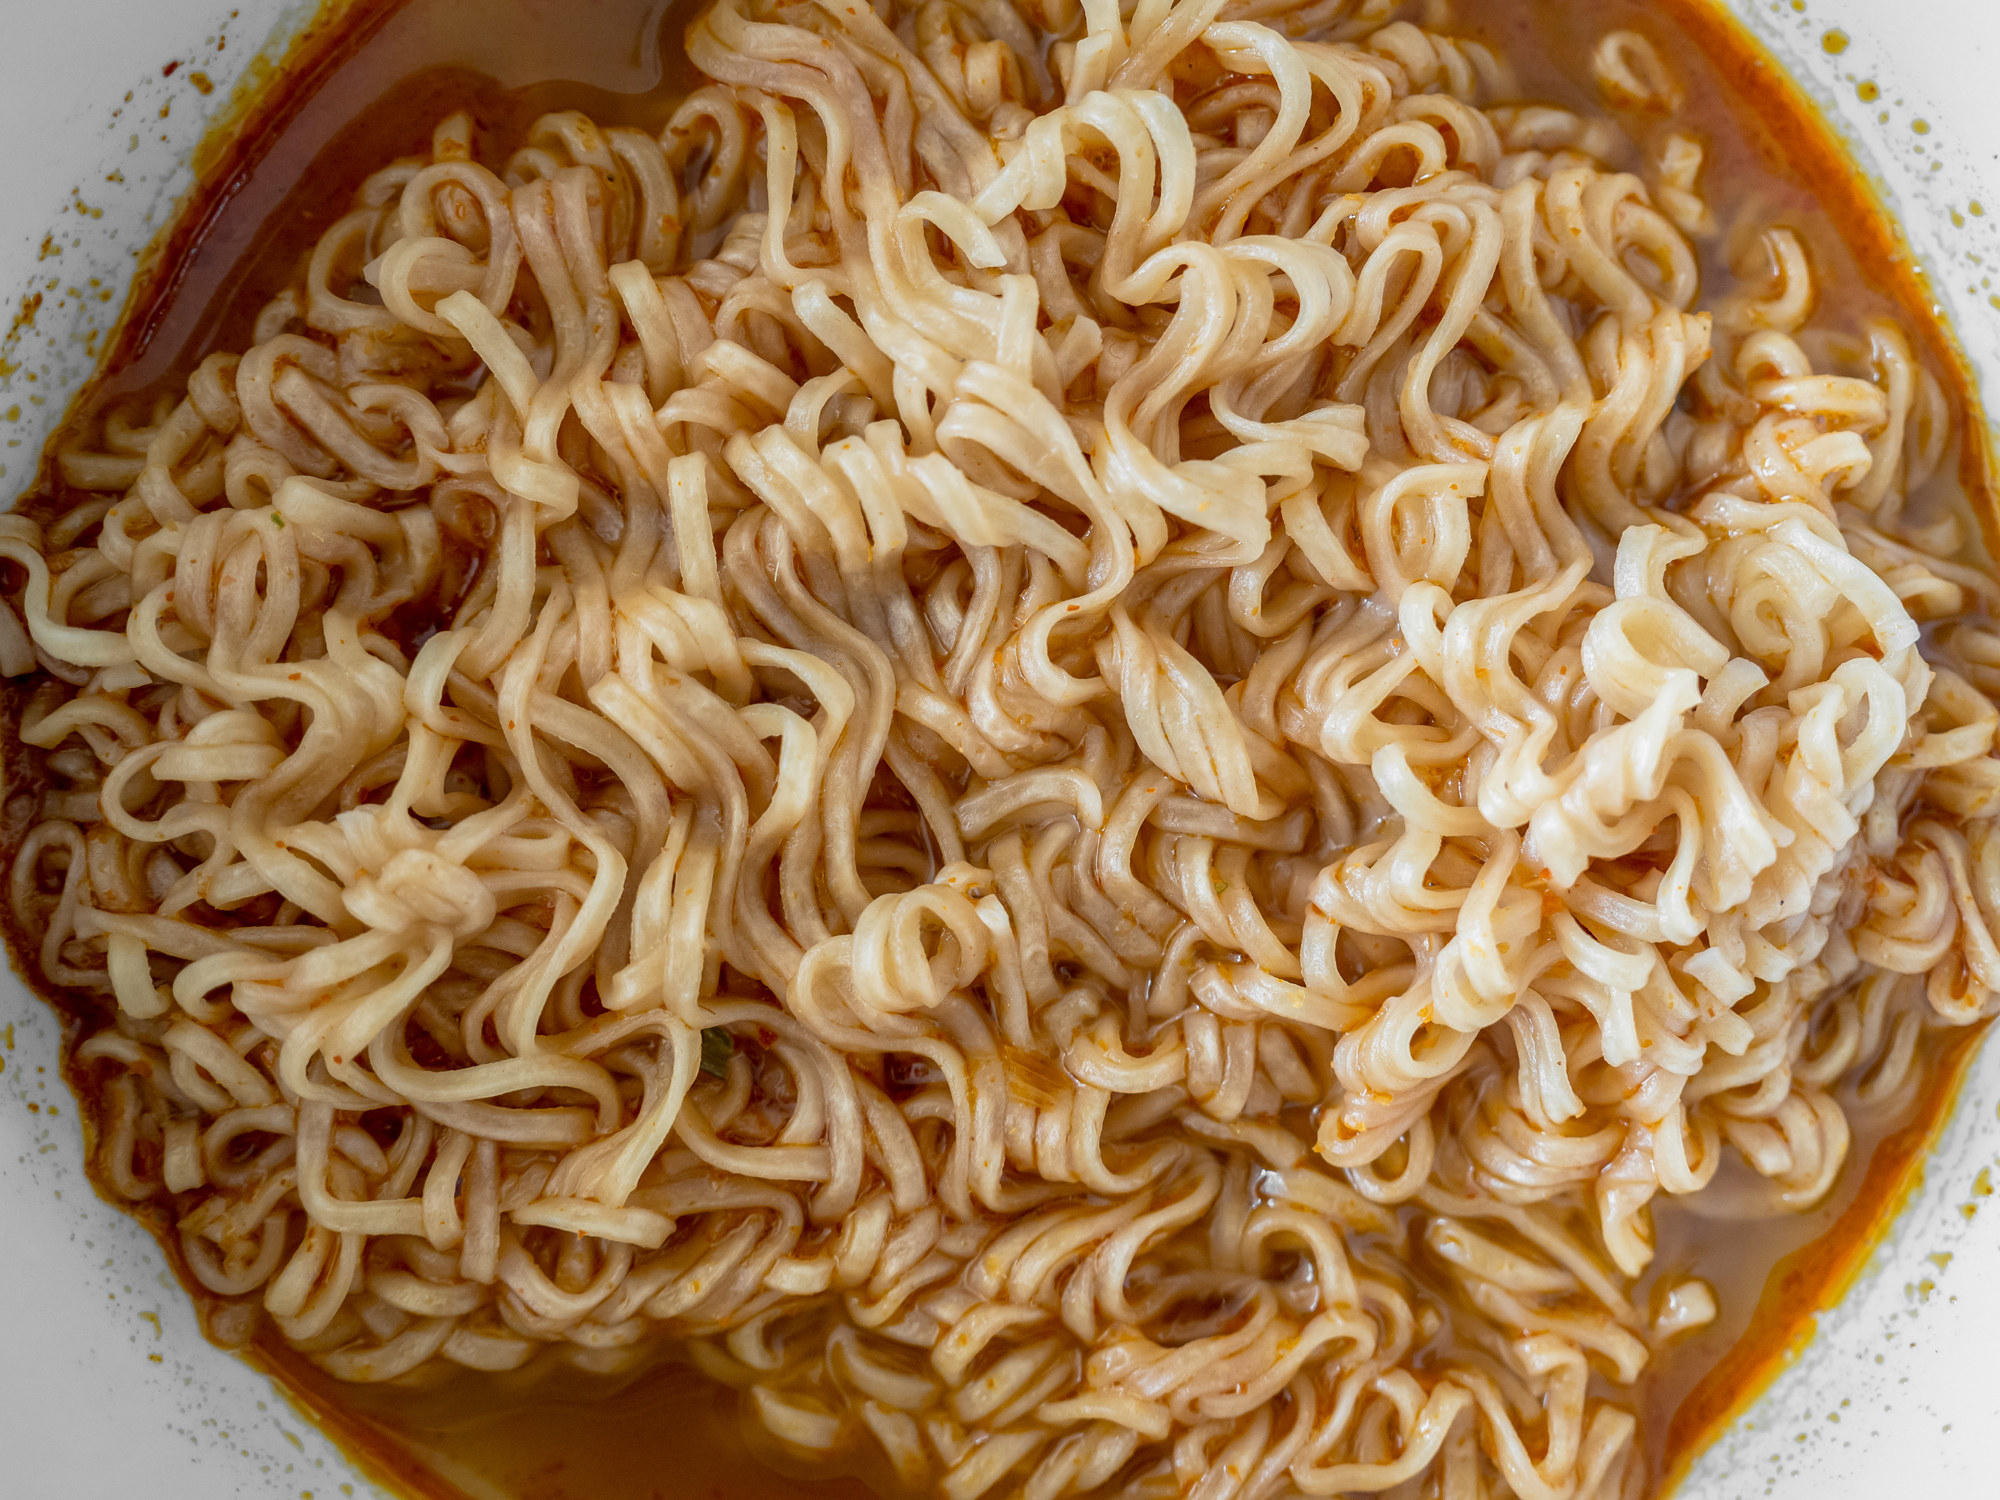 A bowl of spicy instant noodles.